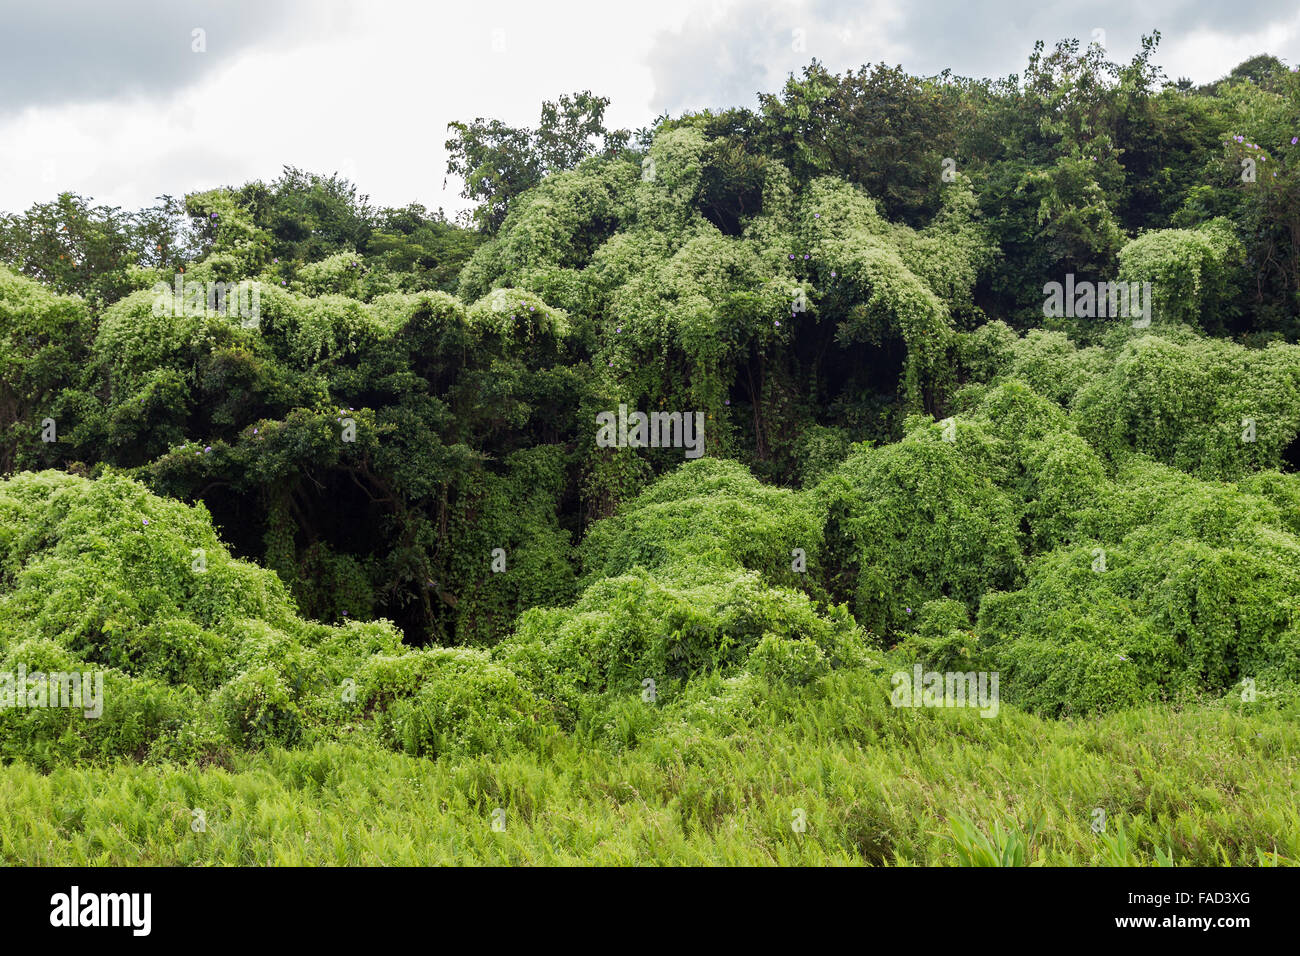 Forest scrambled over by Mikania (Mikania micrantha), a perennial herbaceous vine at the Lamma Island in Hong Kong, China. Stock Photo